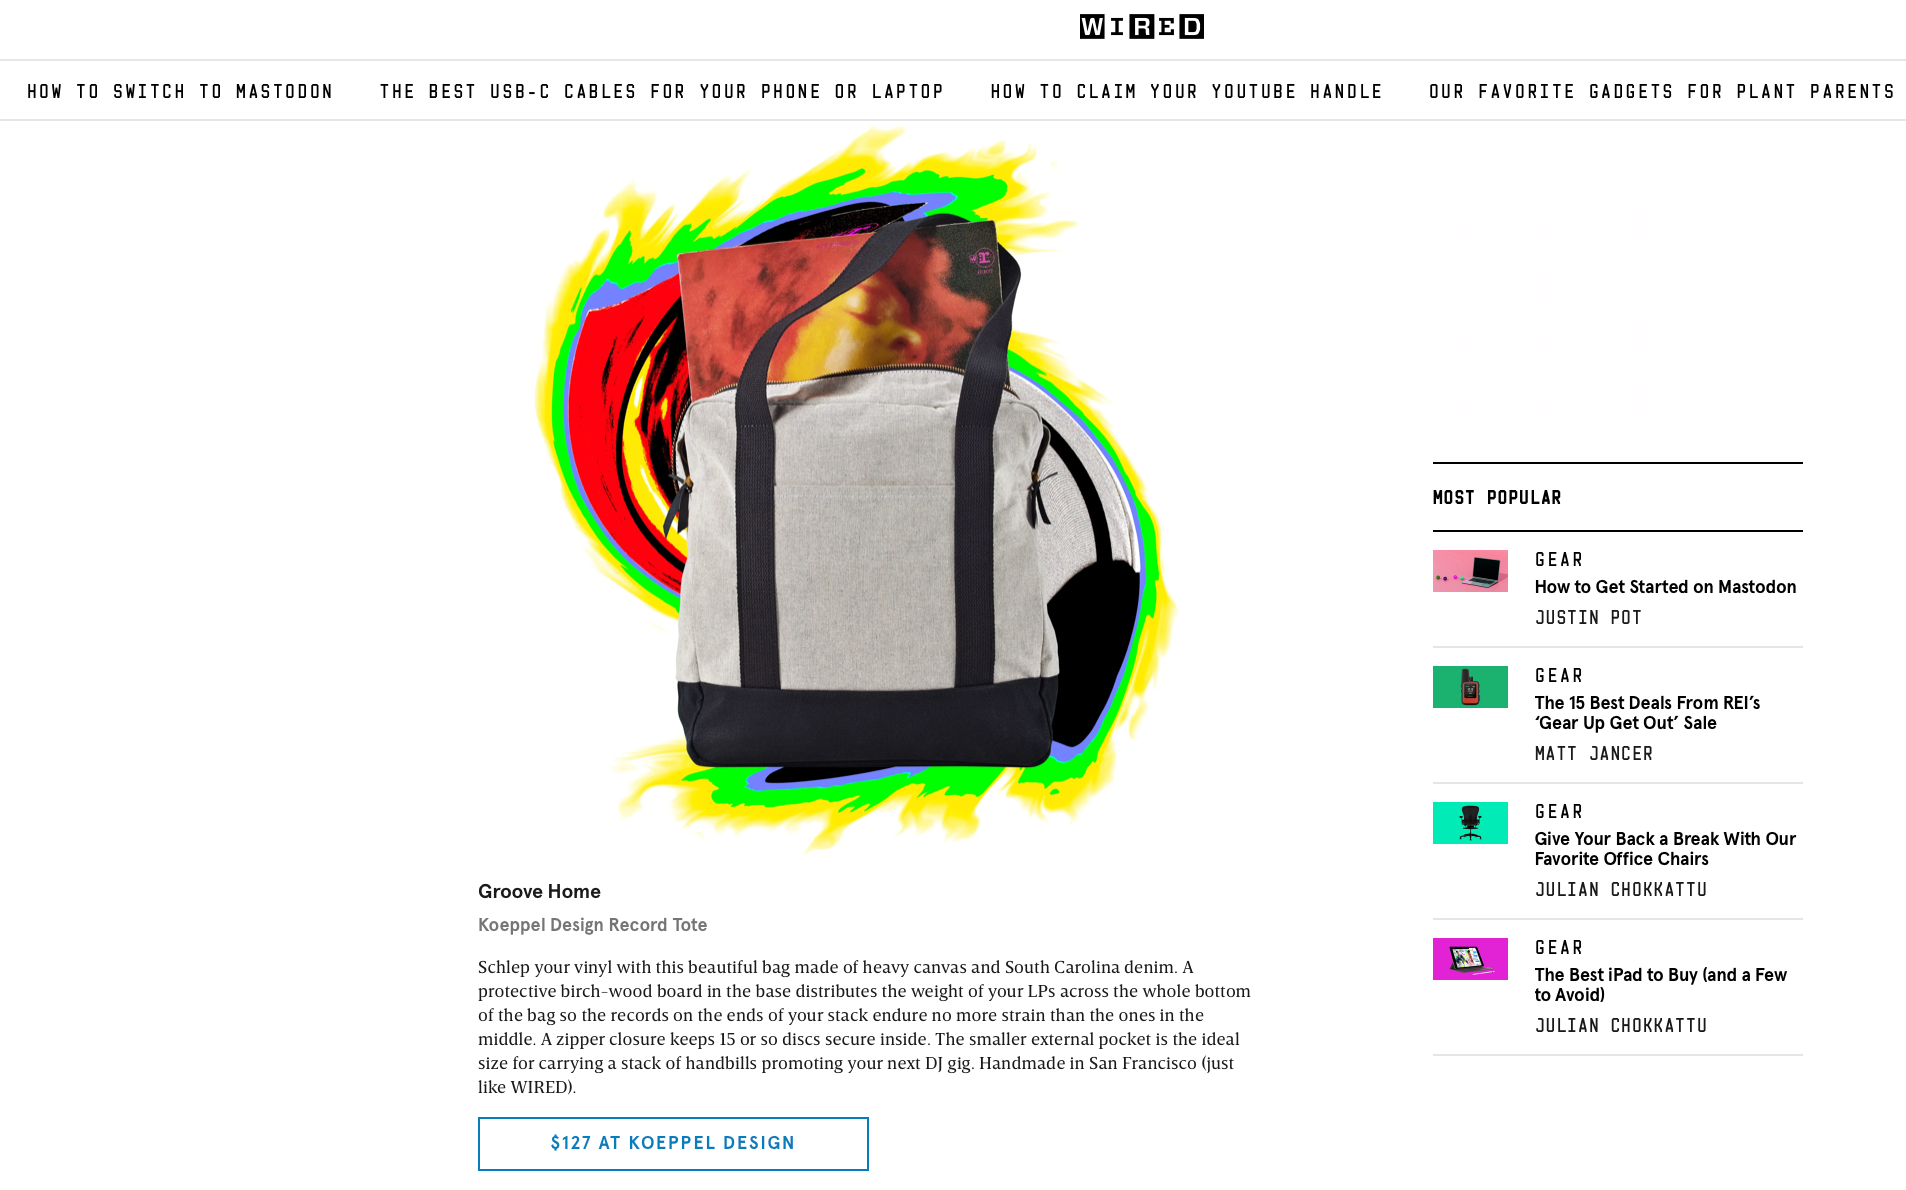 Koeppel Design Record Tote in Wired Magazine Gift Guide